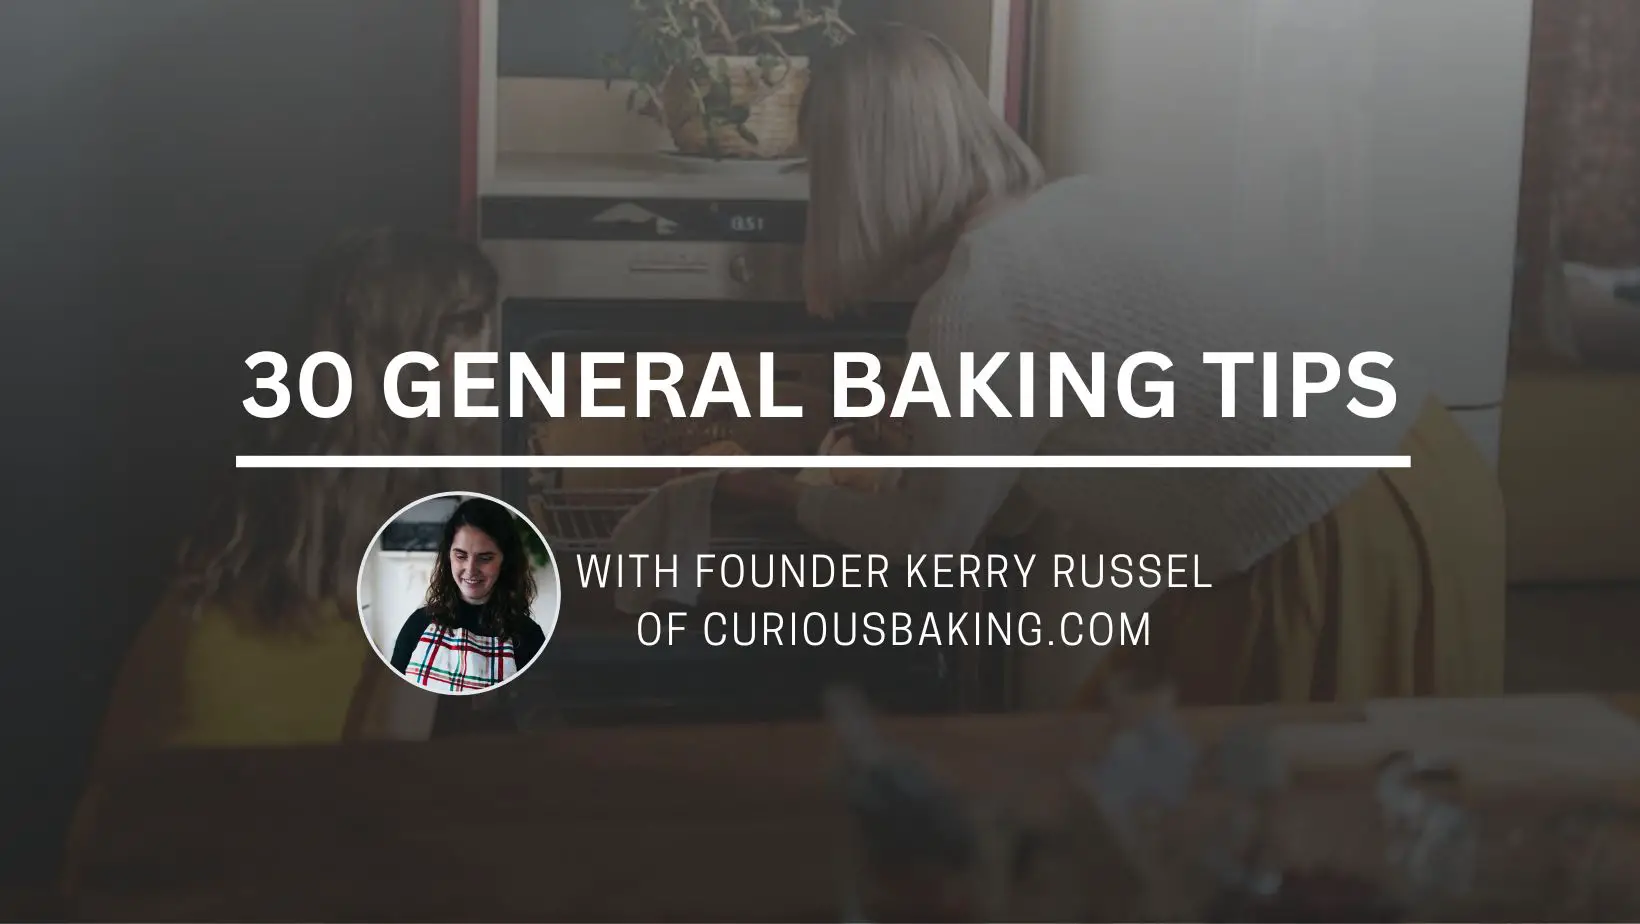 30 general baking tips by CuriousBaking.com